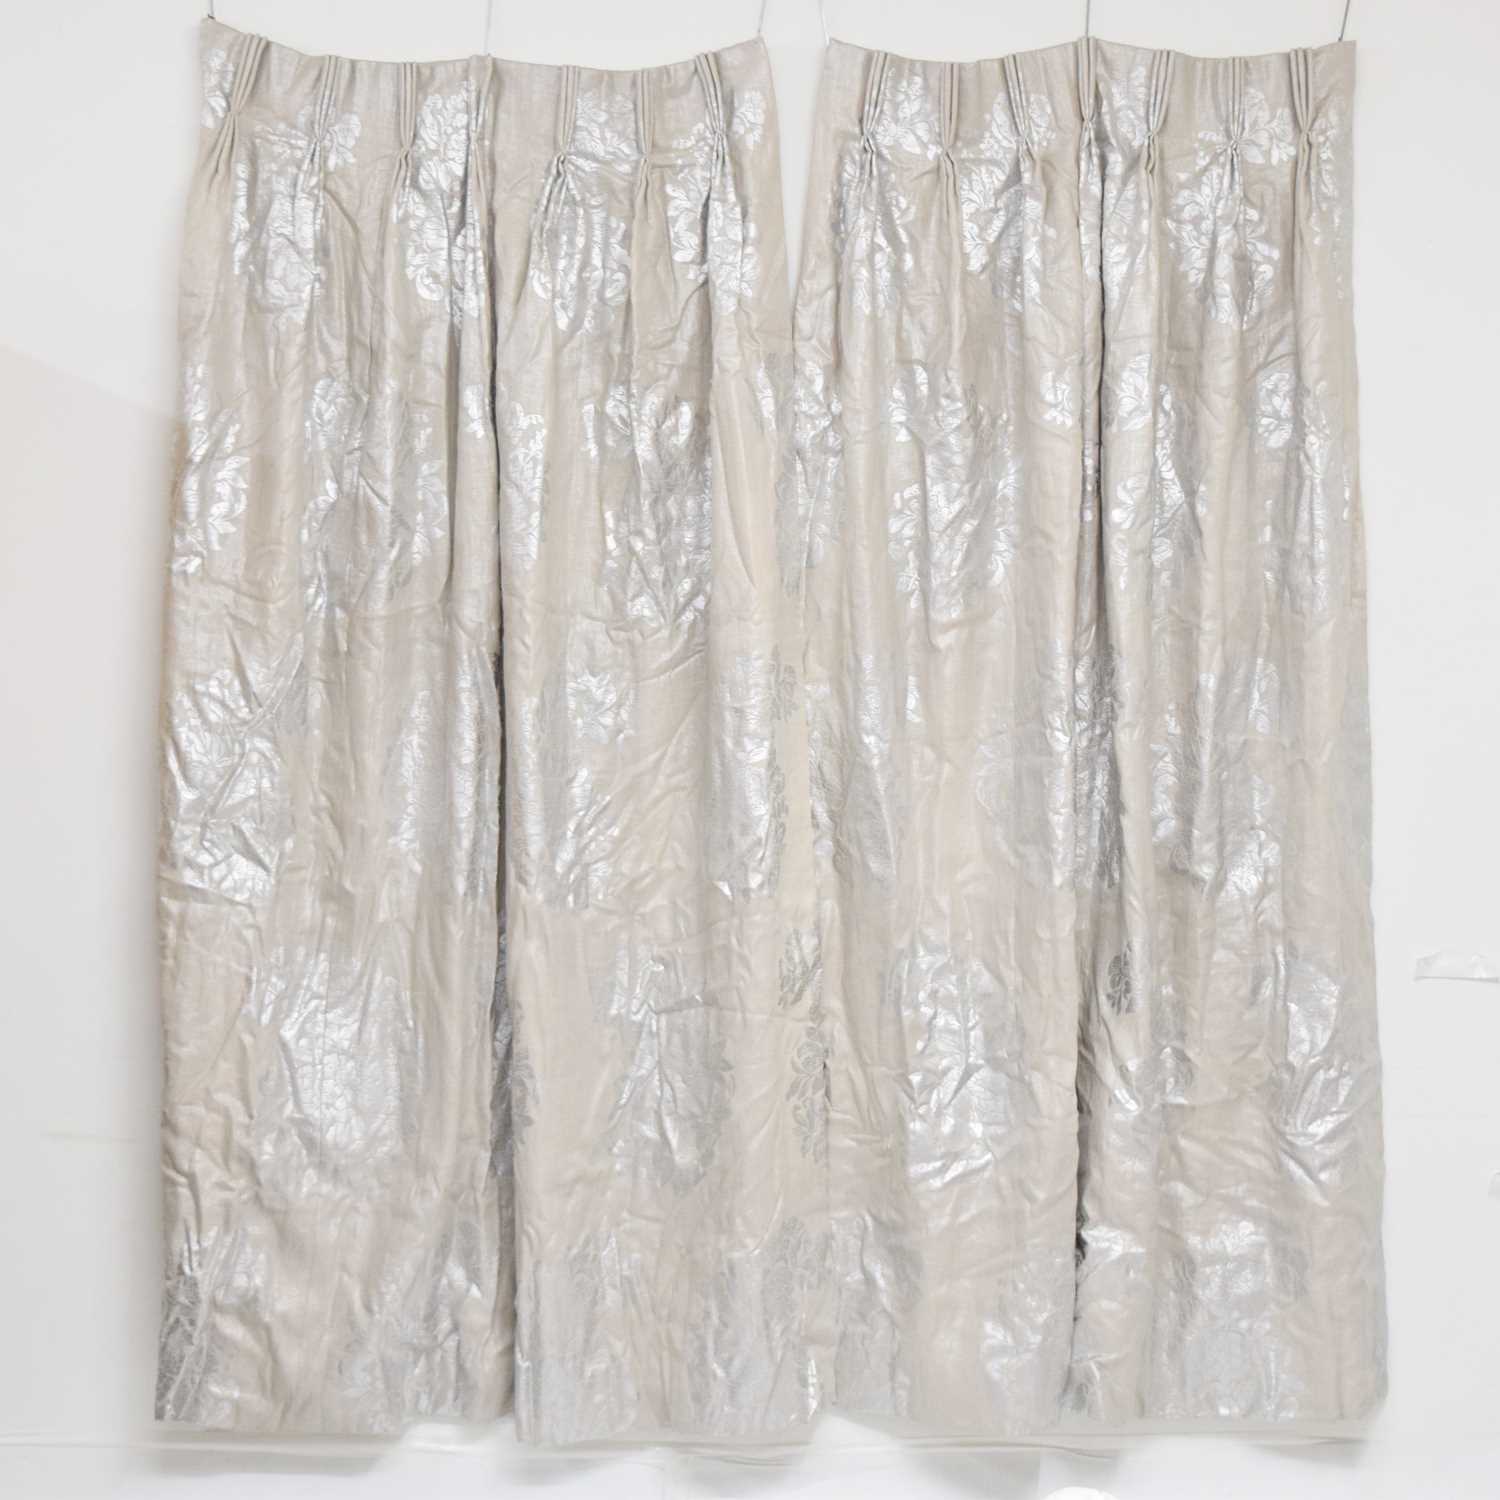 Three curtains, with silver printed floral design